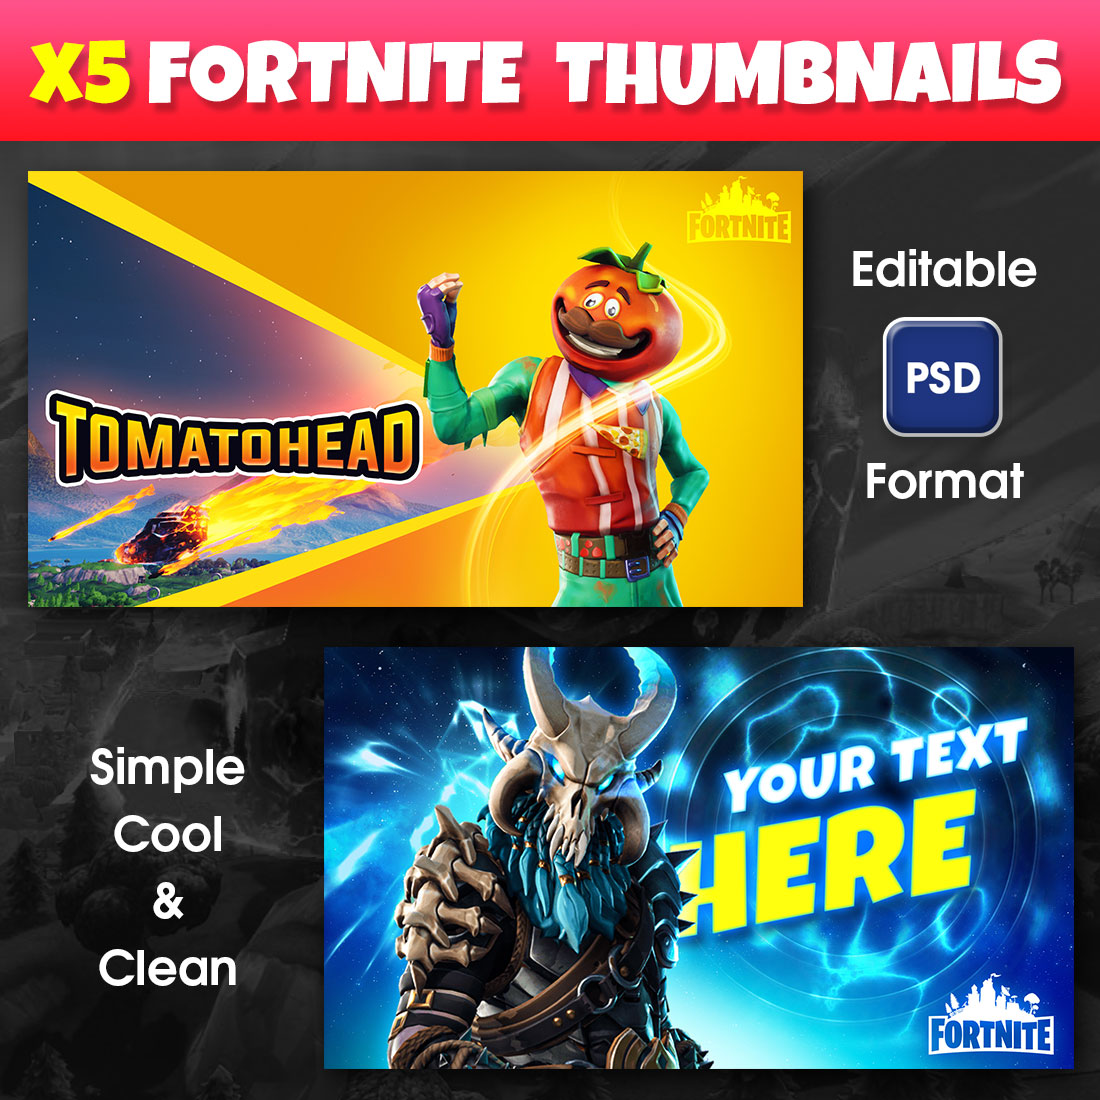 x5 Fortnite Gaming Thumbnails Templates preview image.